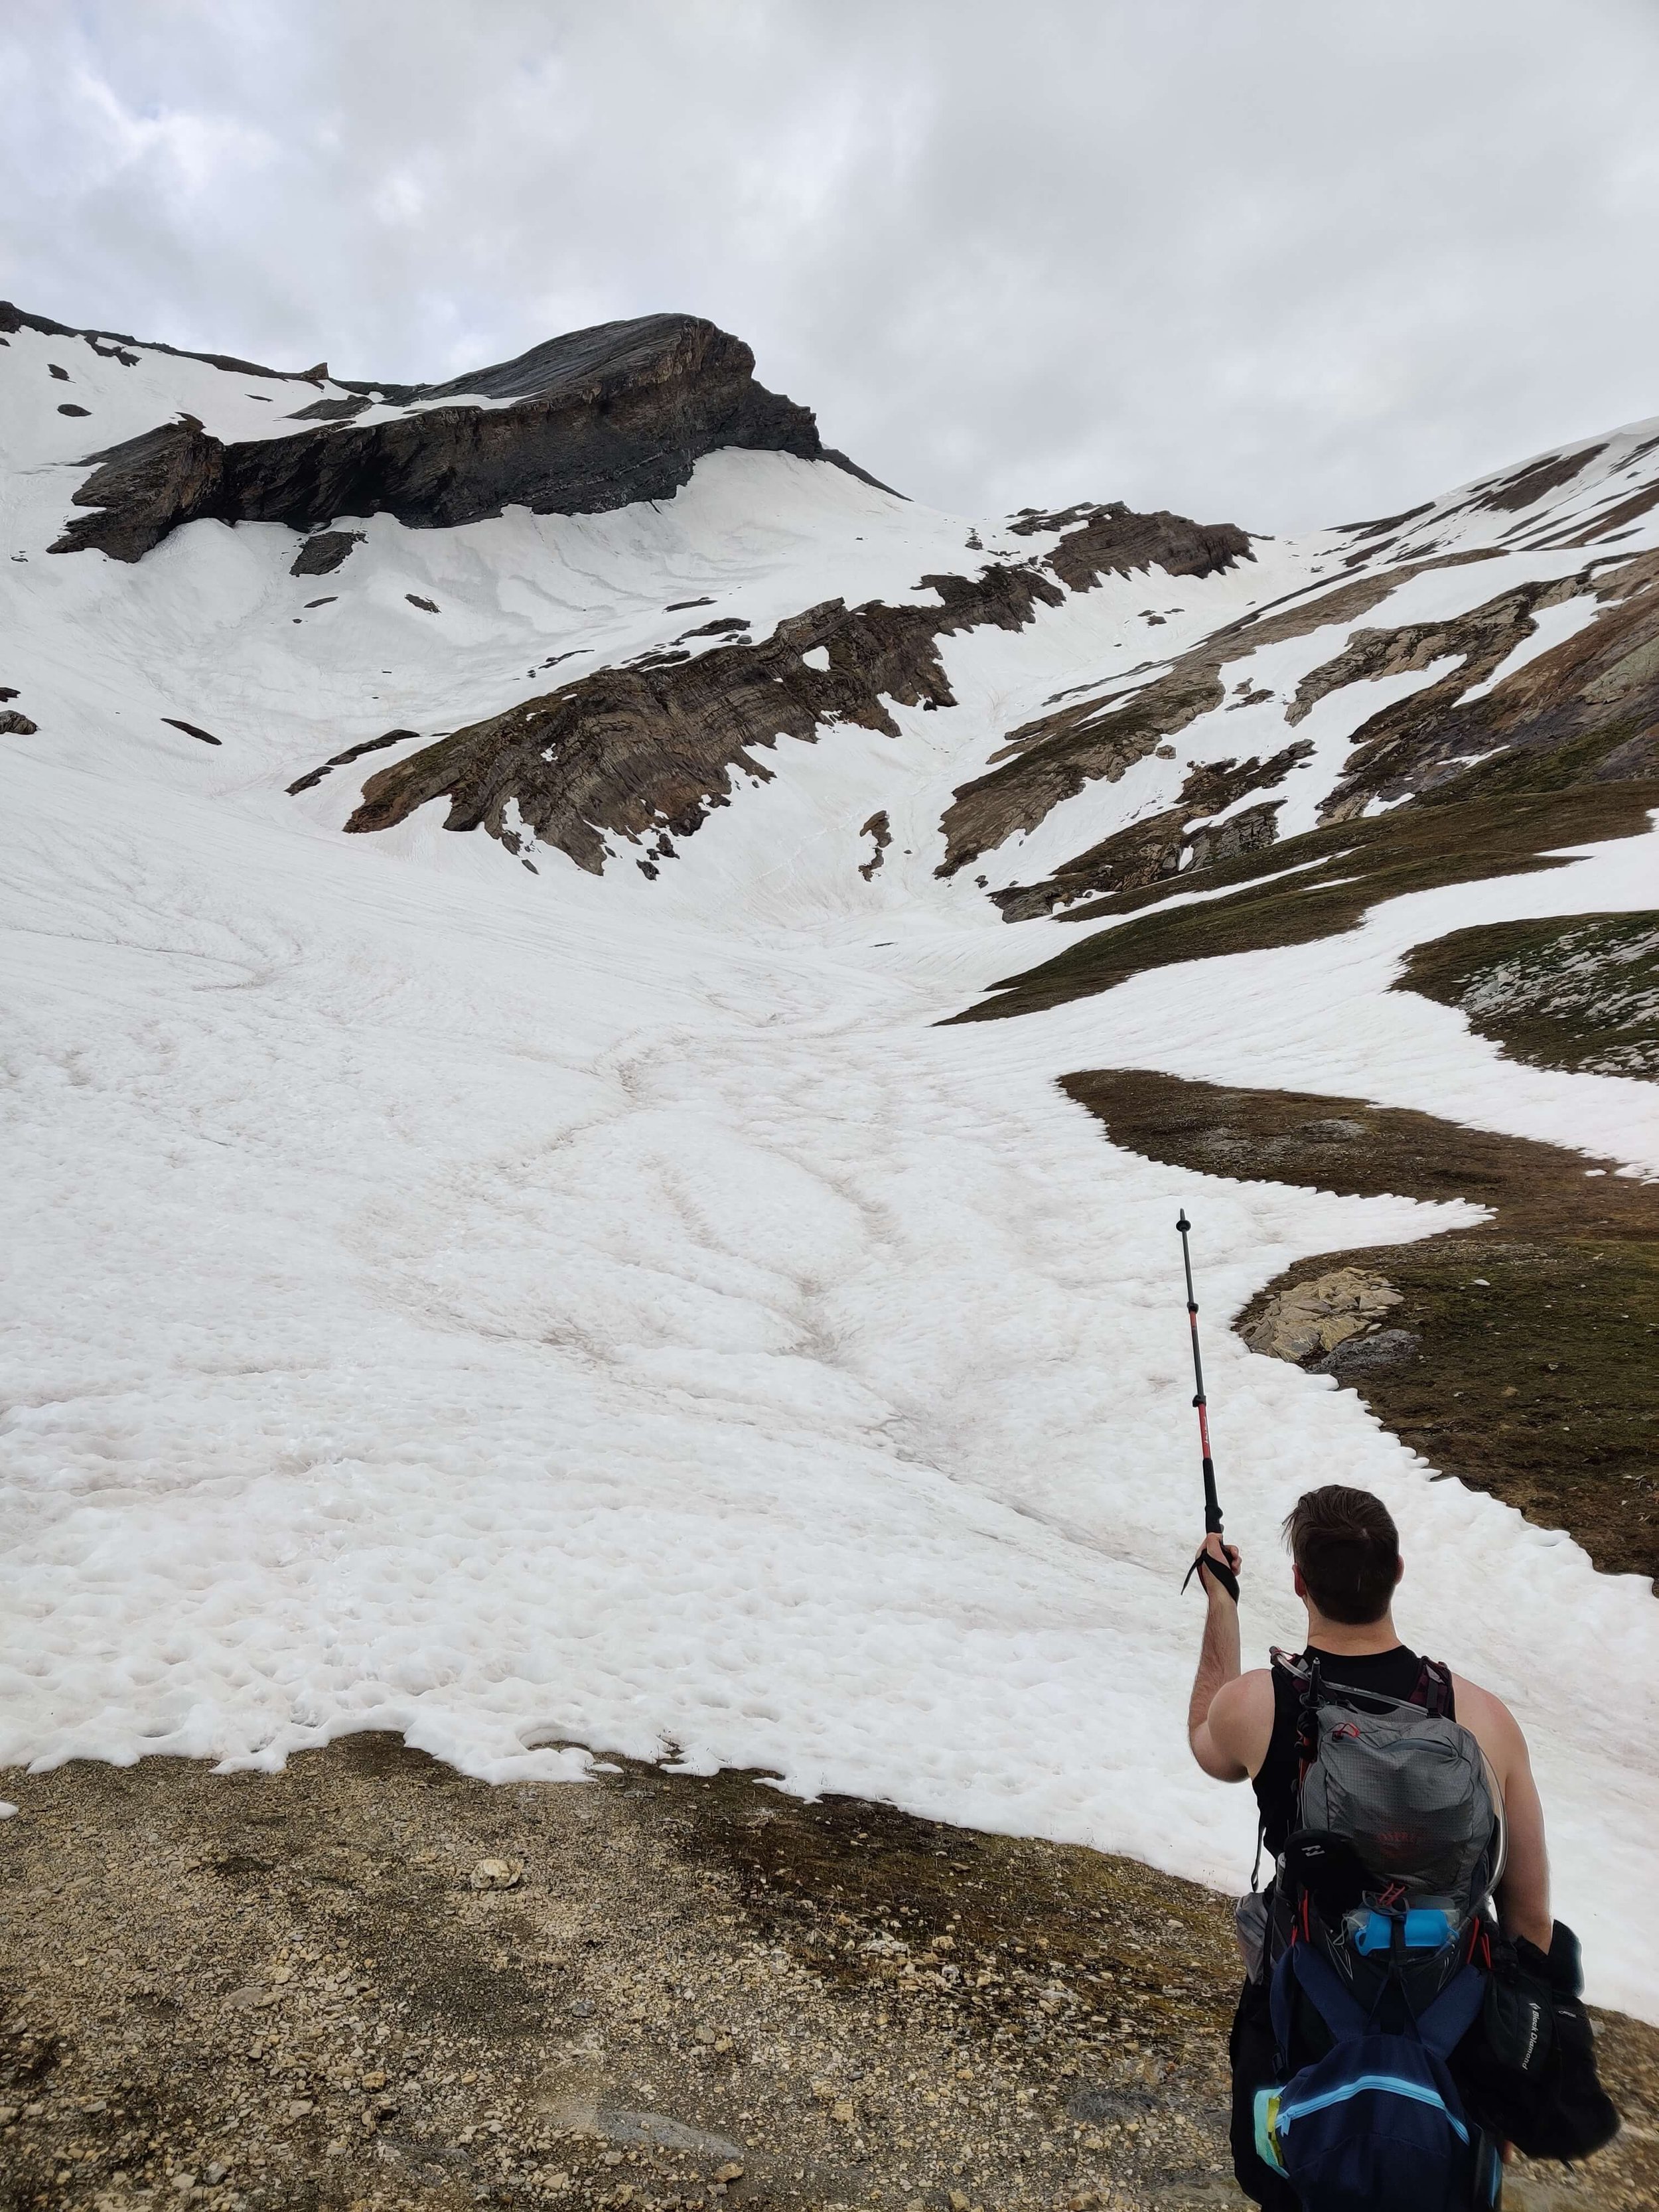 Pointing back up at Col Des Fours from first clear patch of snow on way down_30 May 2022_resized.jpg